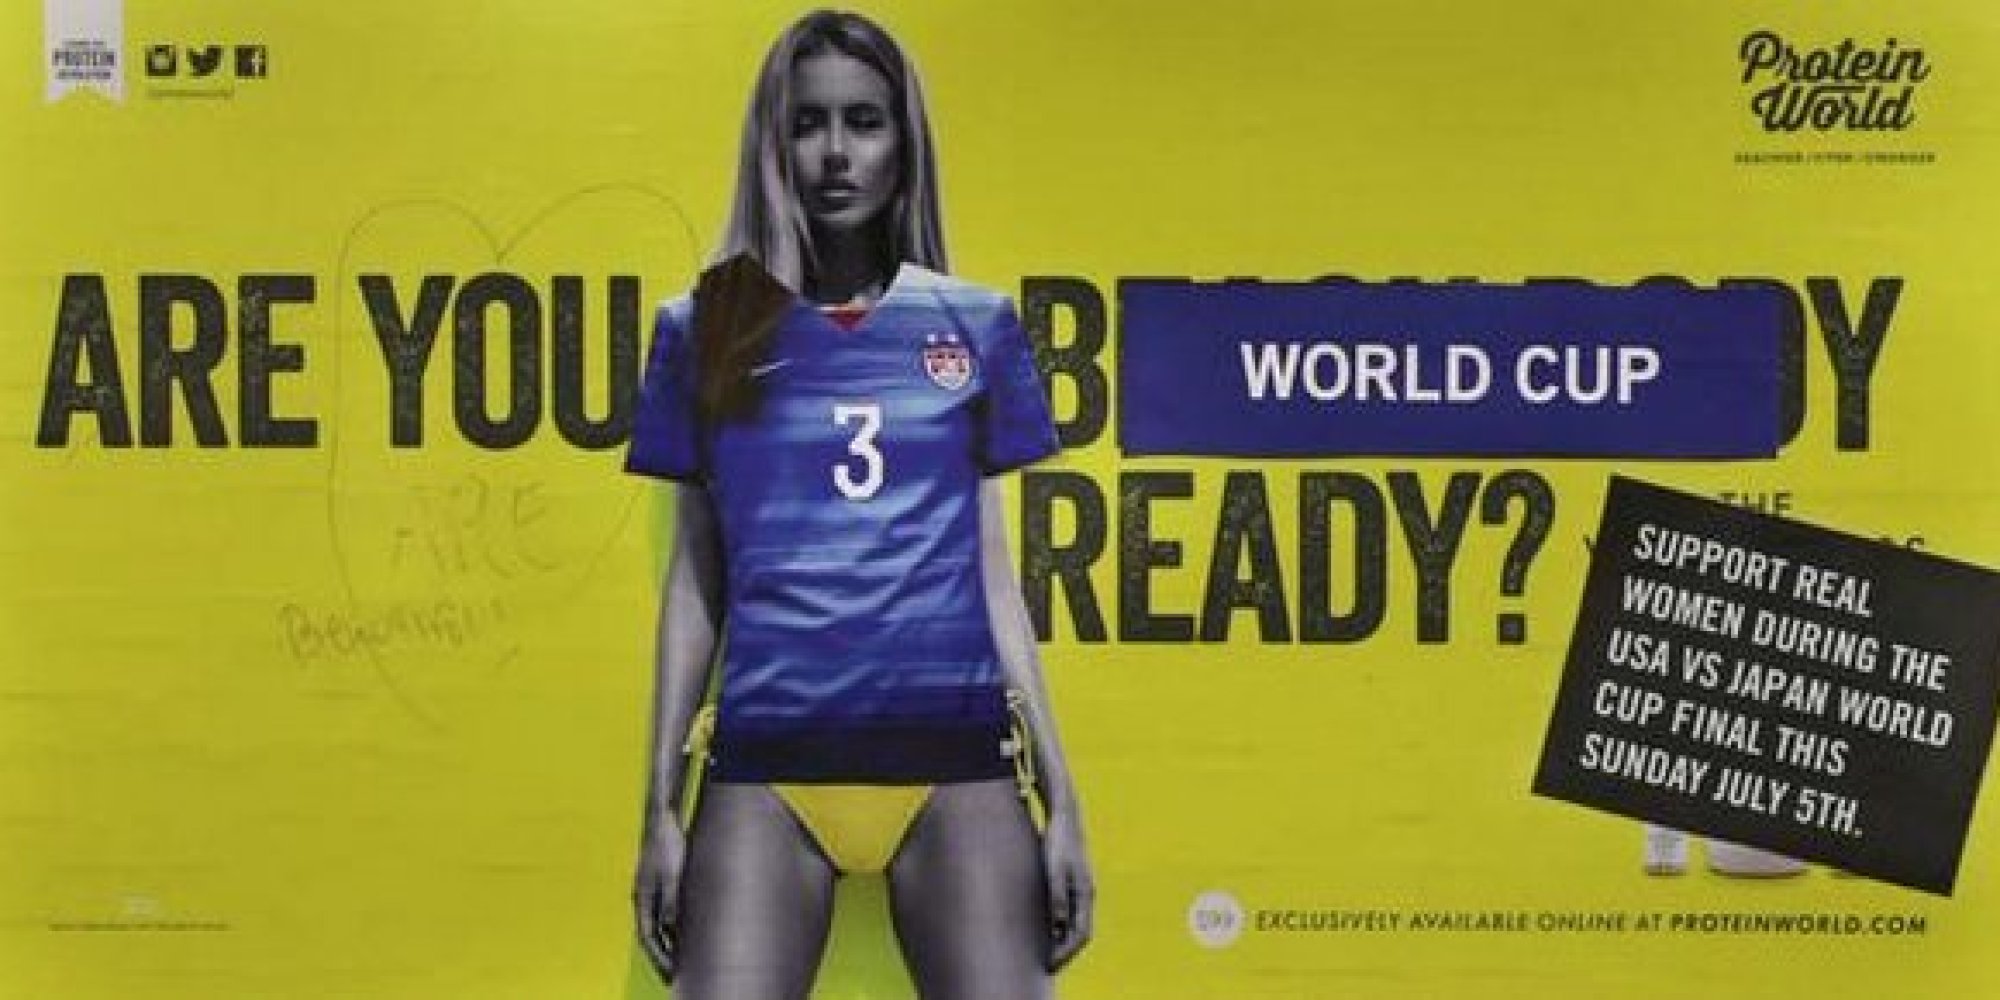 Womens World Cup Vs Protein World New Yorkers Cover Controversial Beach Body Adverts With Us